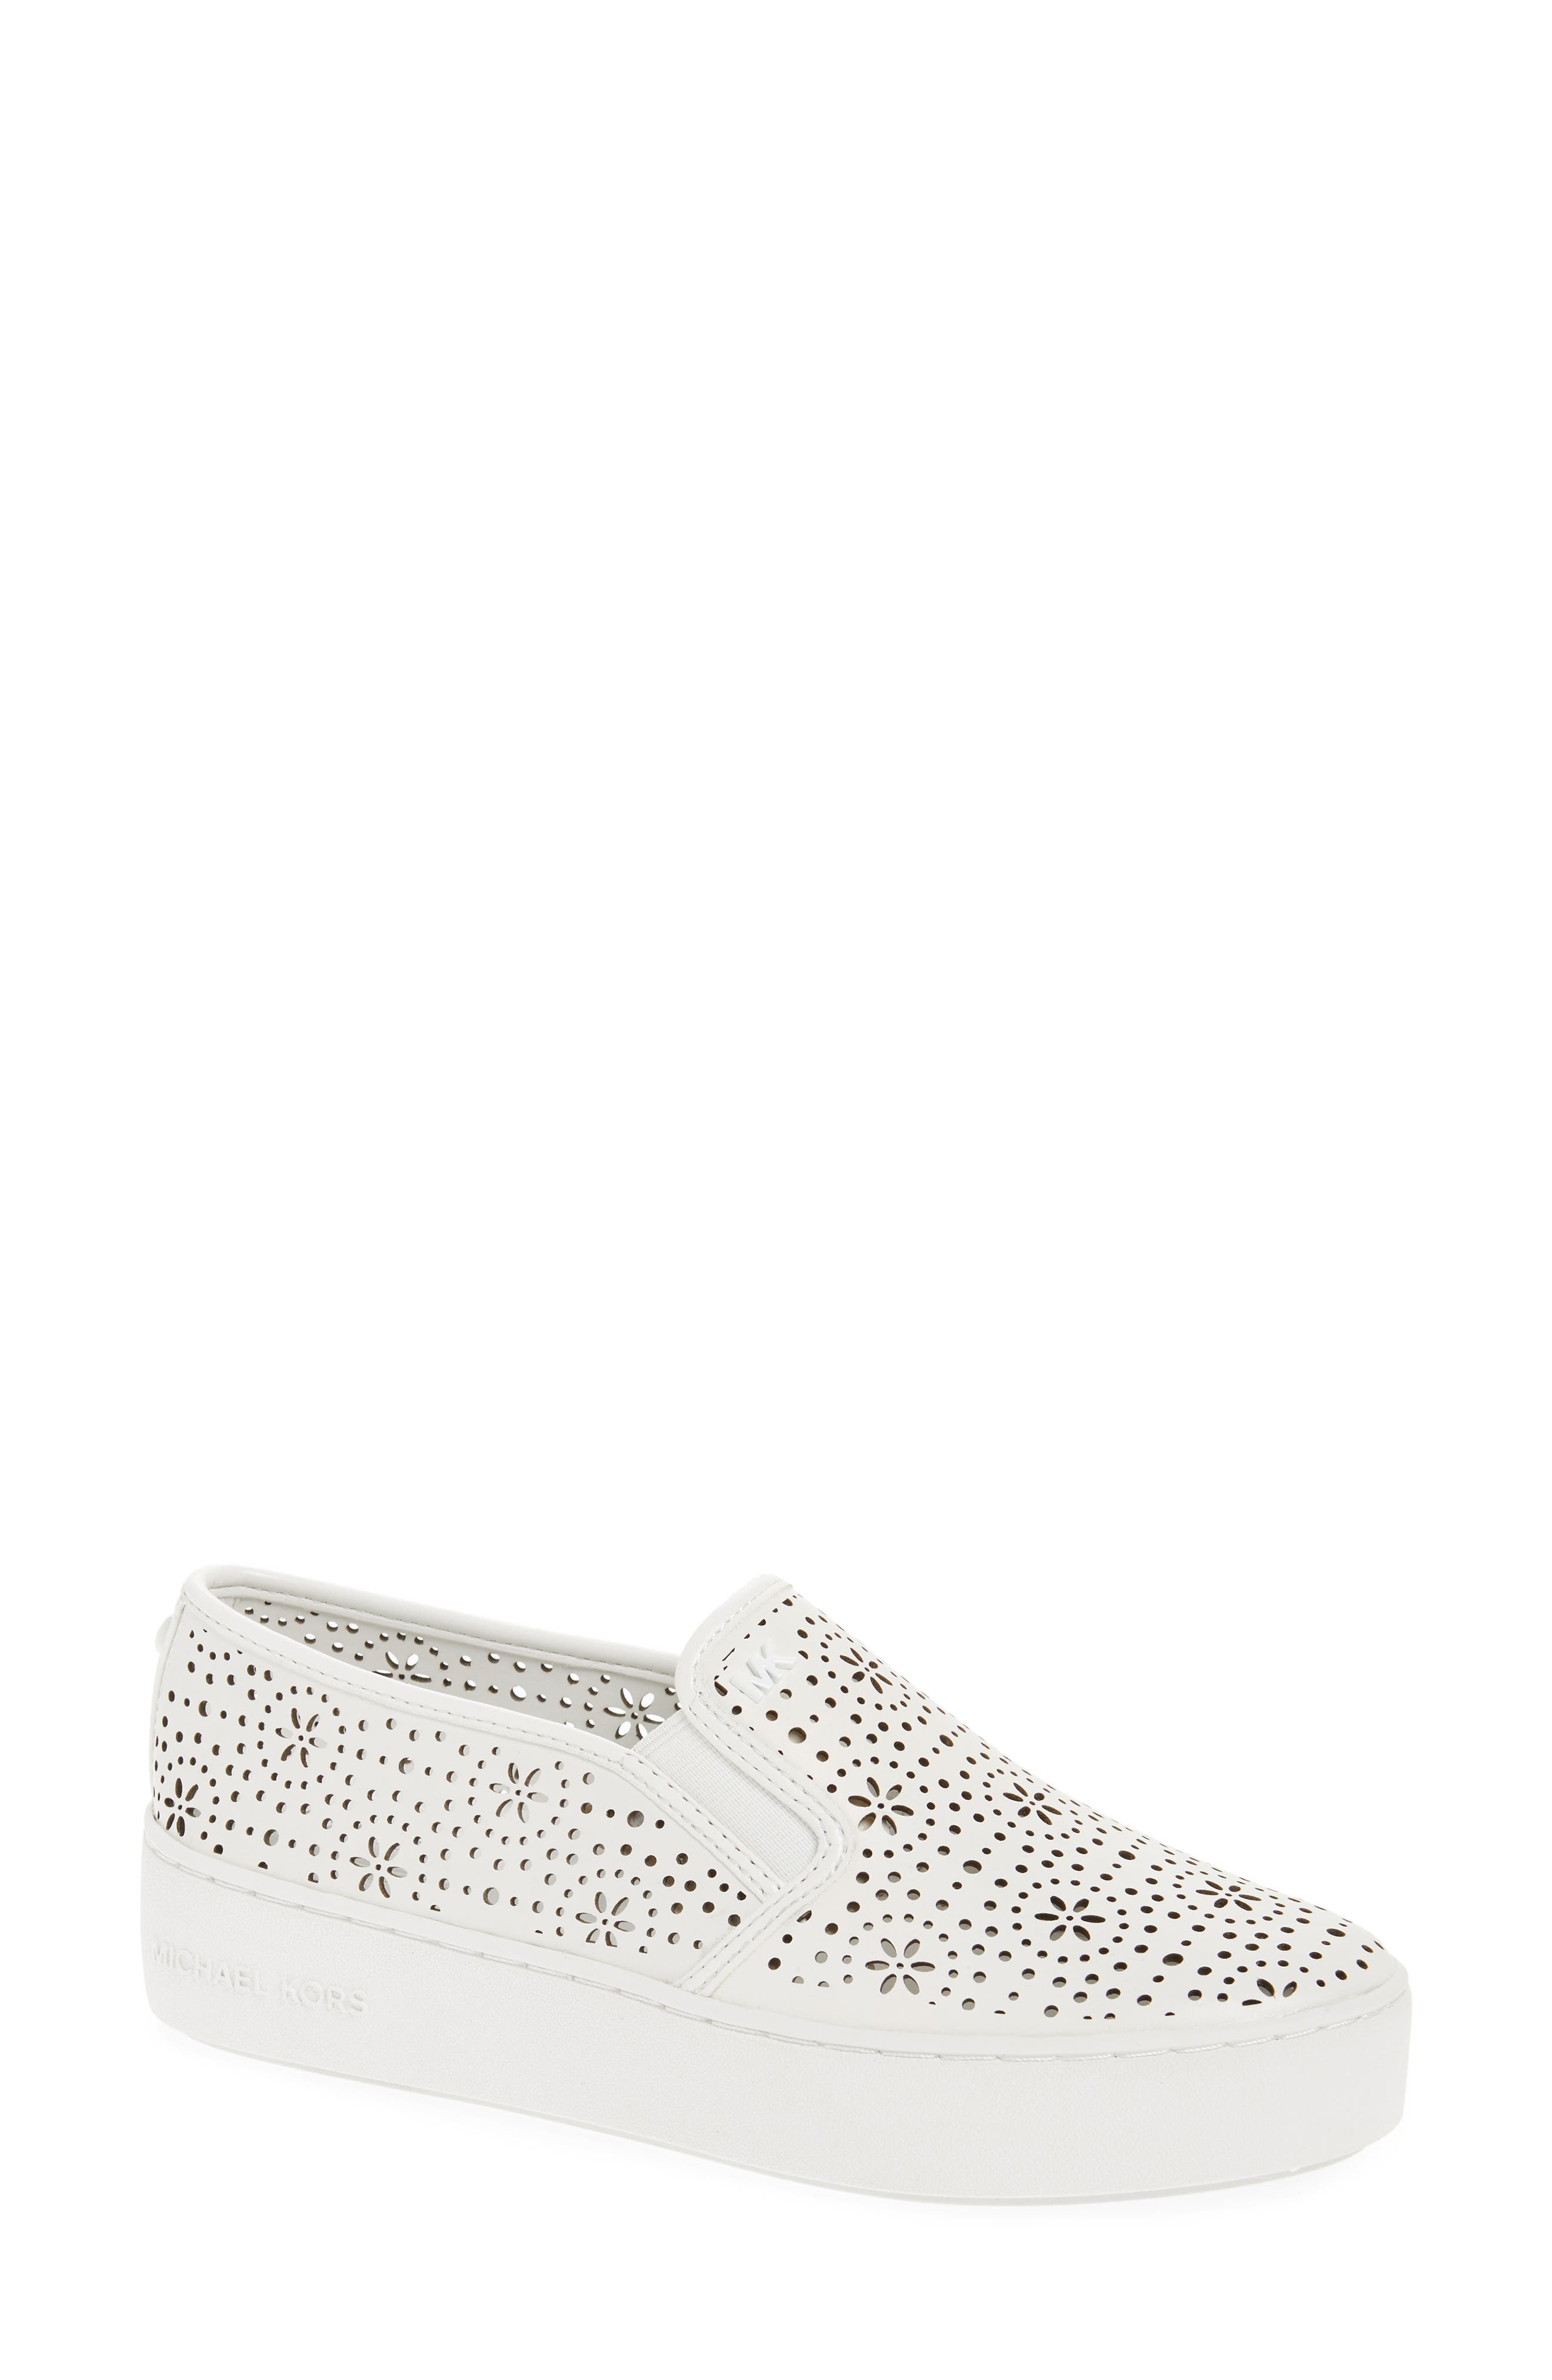 MICHAEL MICHAEL KORS WOMEN'S TRENT PERFORATED LEATHER SLIP-ON SNEAKERS ...